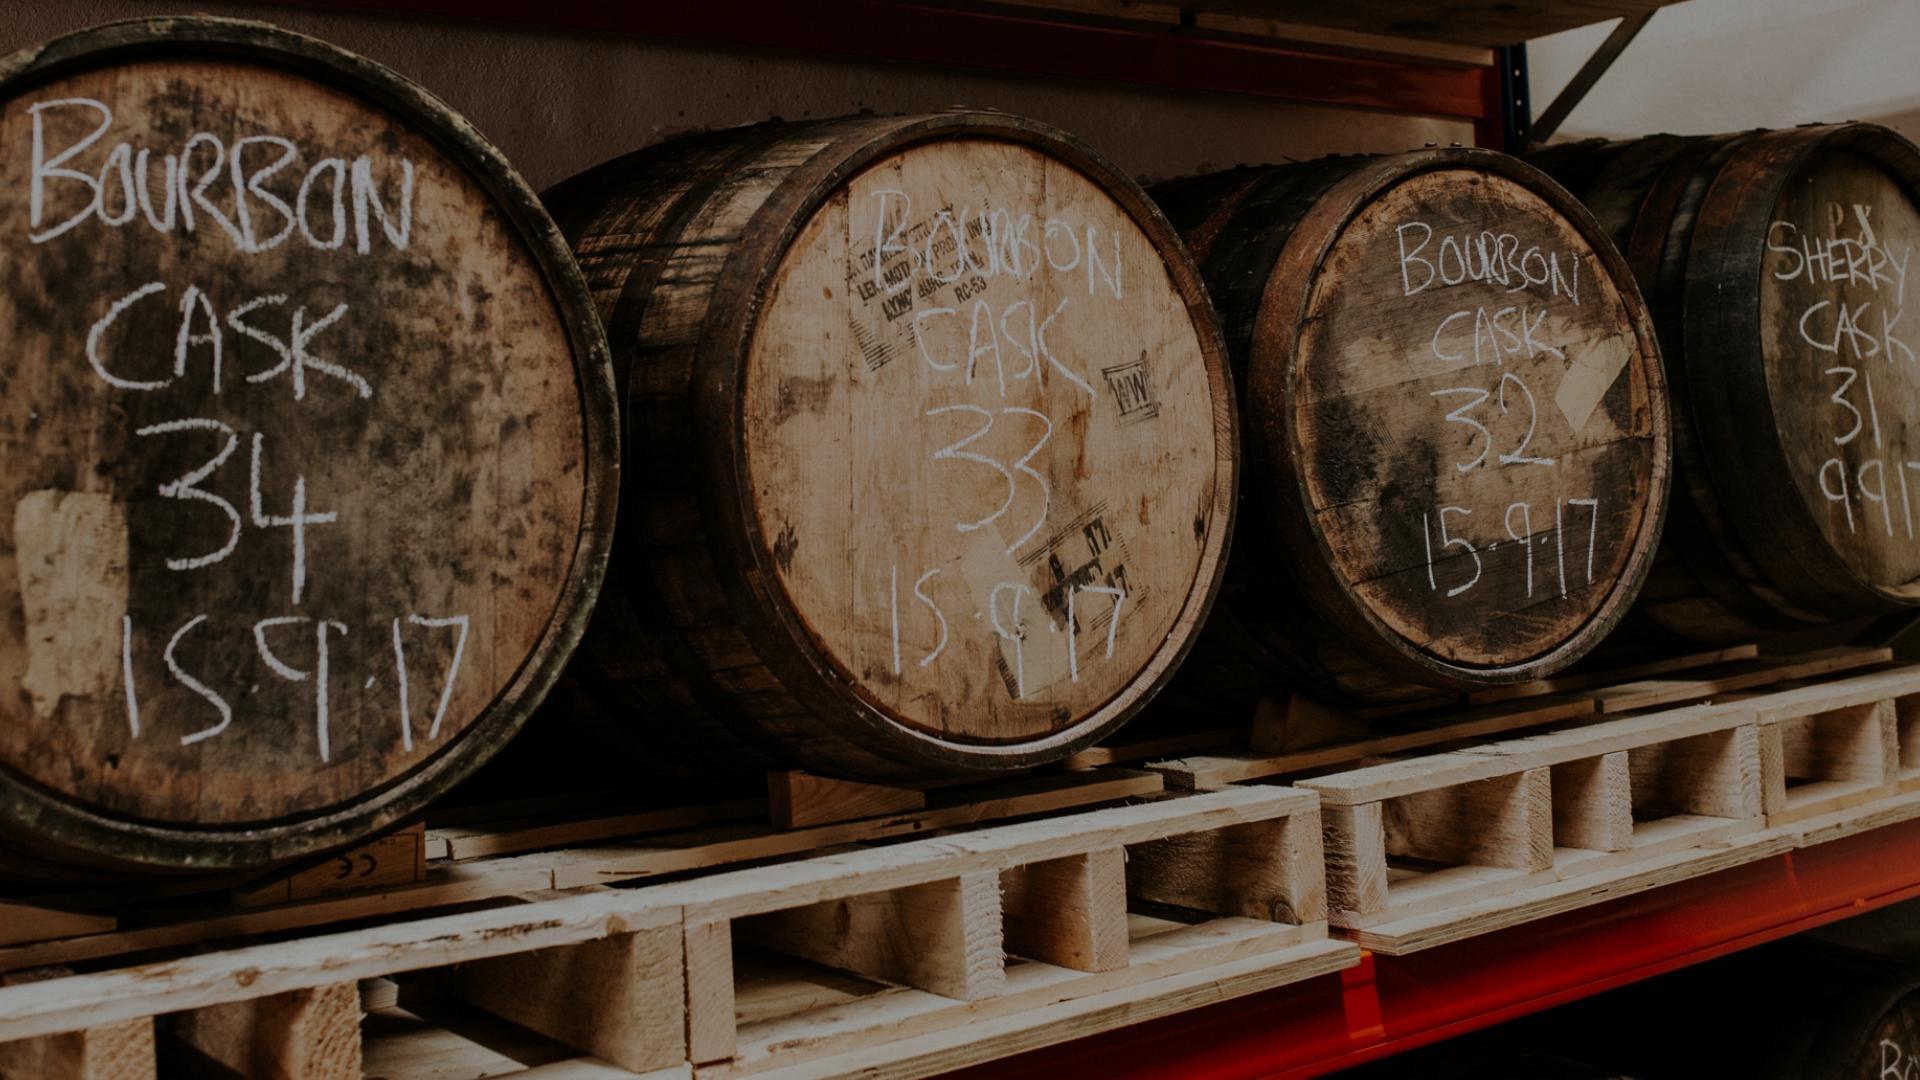 What gives Whisky its colour? The cask 